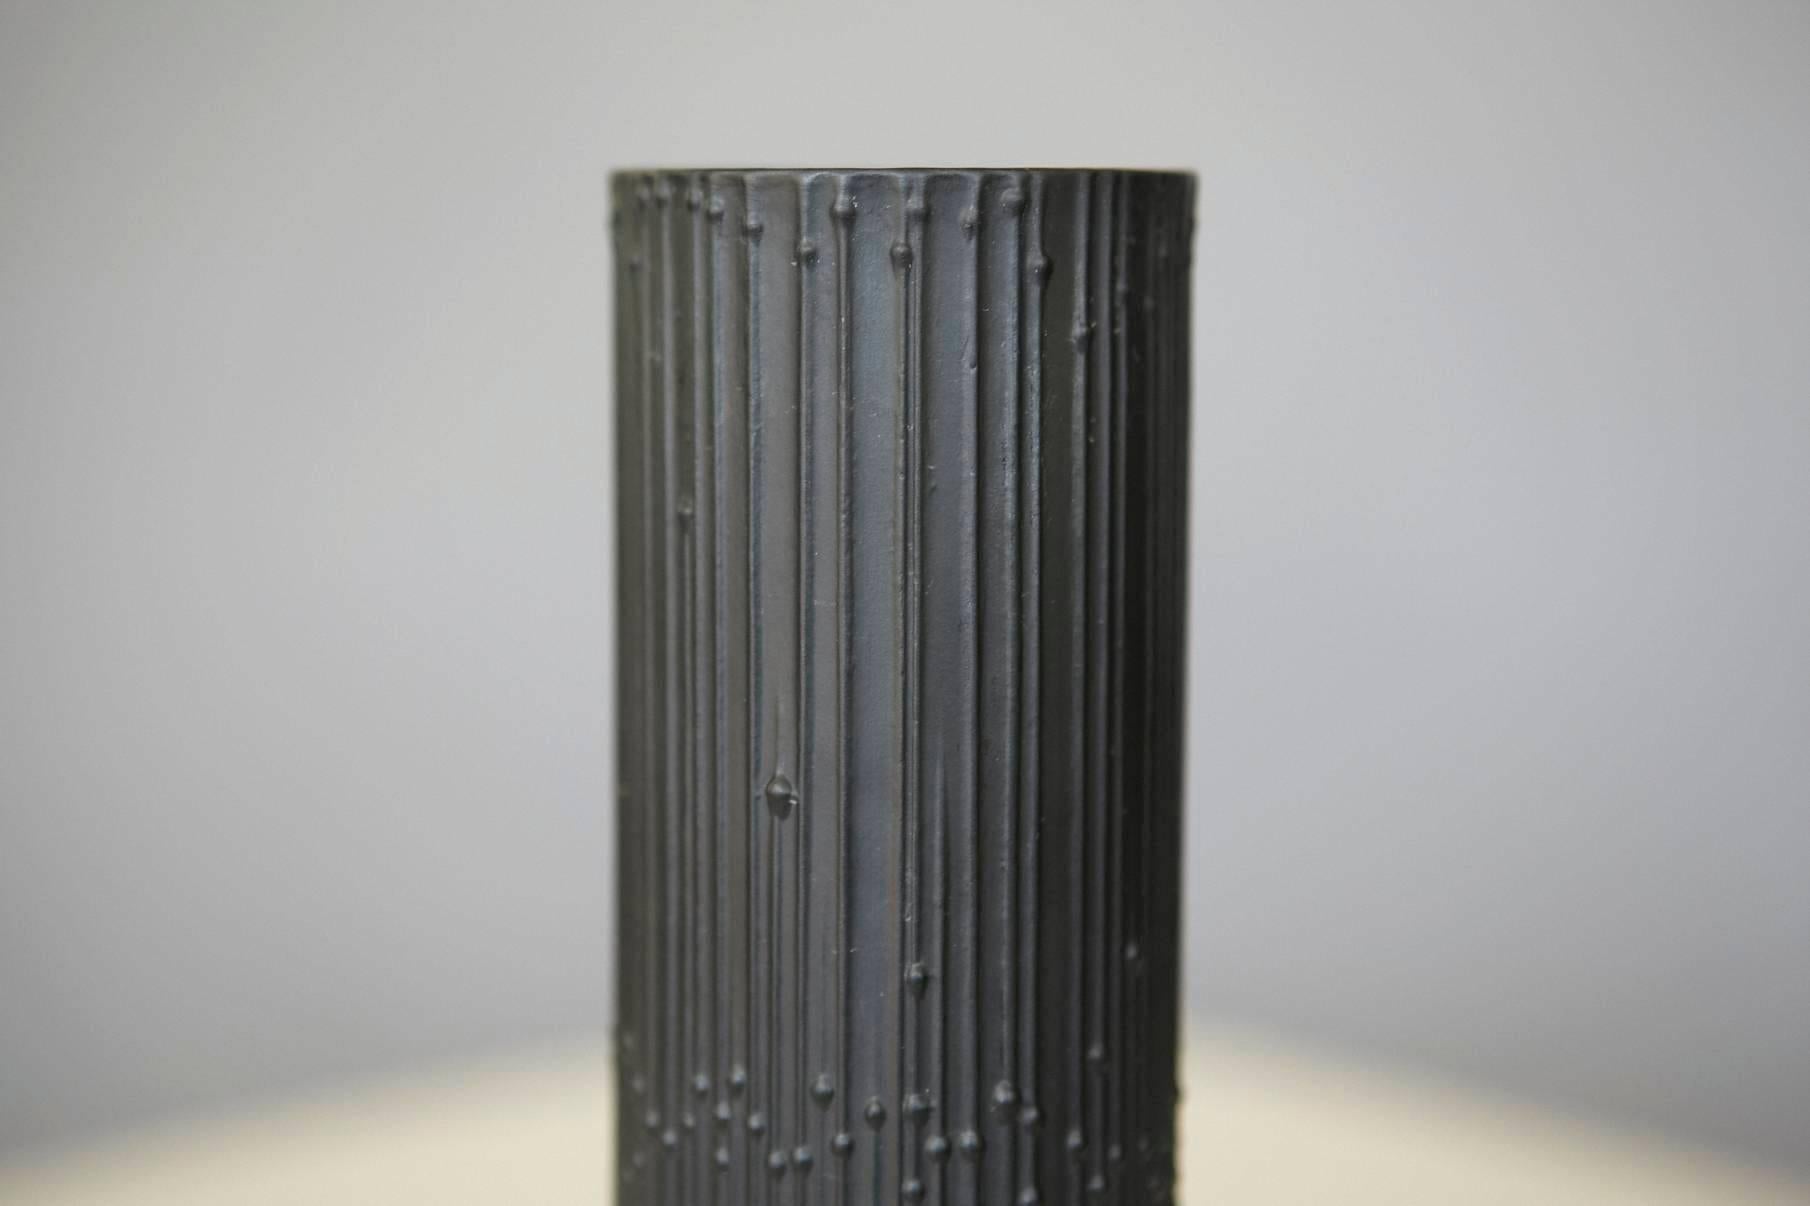 Stunning cylindrical black matte porcelain vase designed by Tapio Wirkkala for Rosenthal Studio Line. 
Sublime relief of beaded pearls running down vertical lines, gives an impression of movement.
Except condition inside and out, no chips or